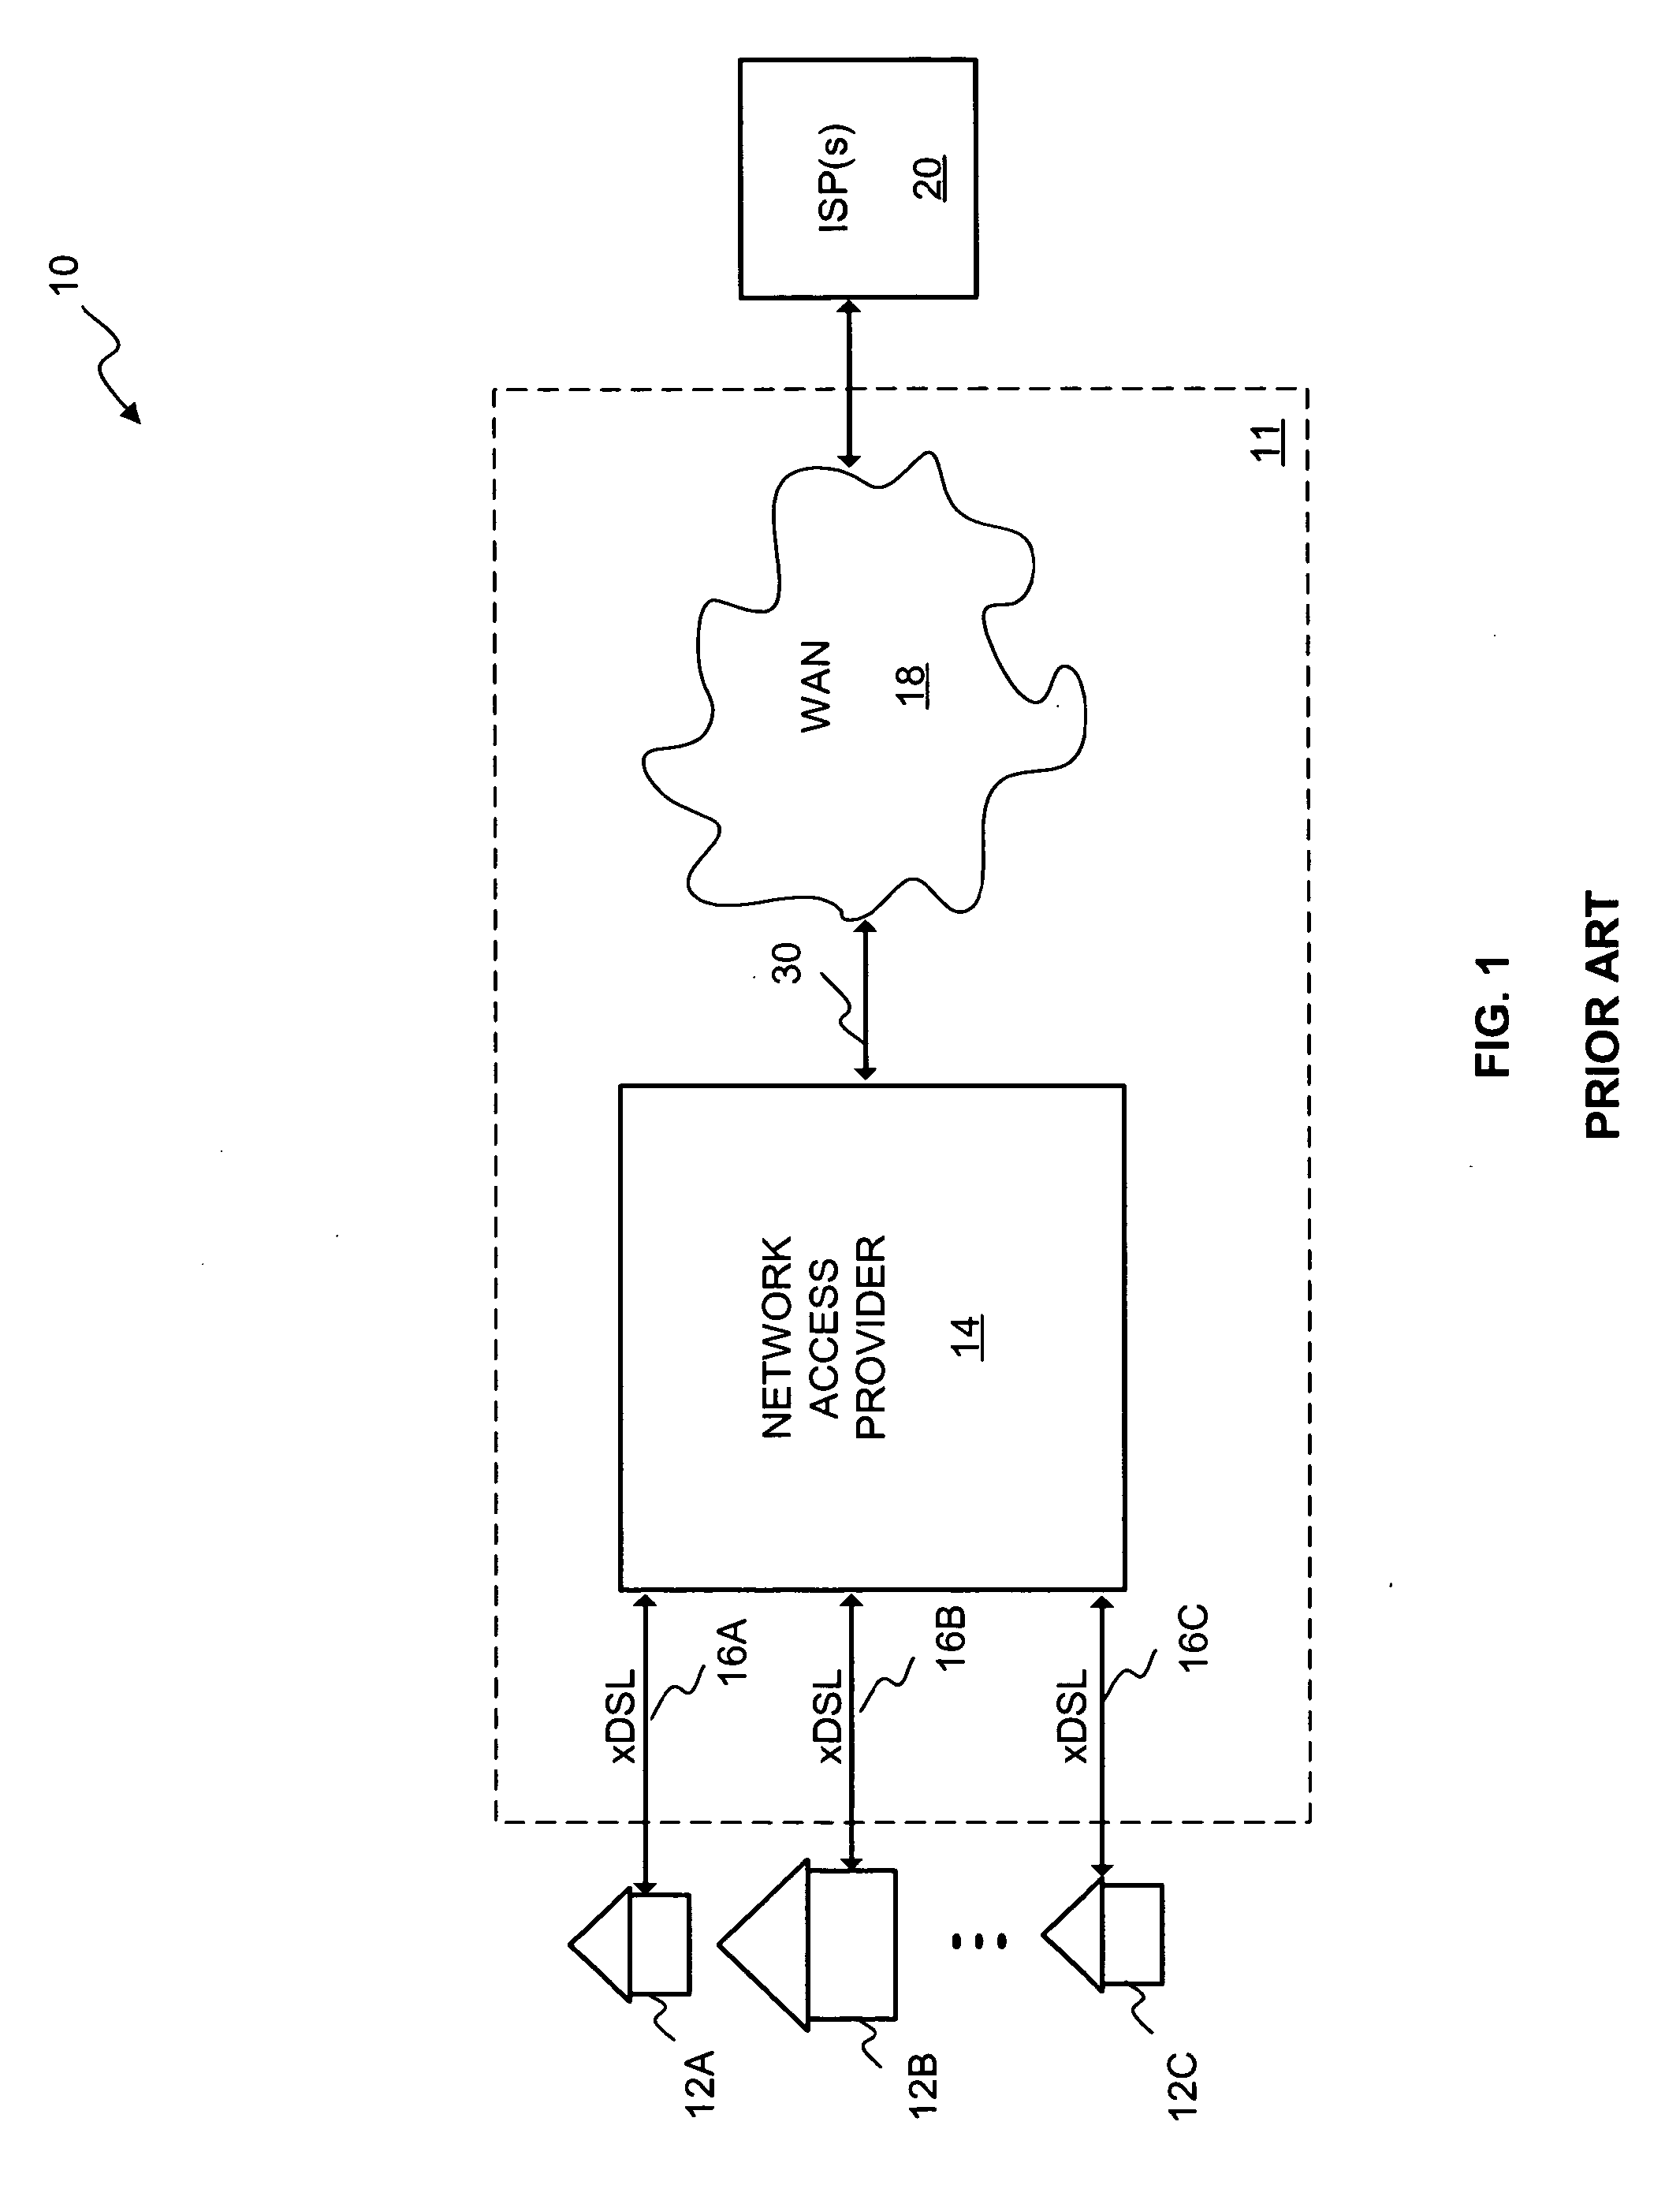 System and Method for Transparent Virtual Routing